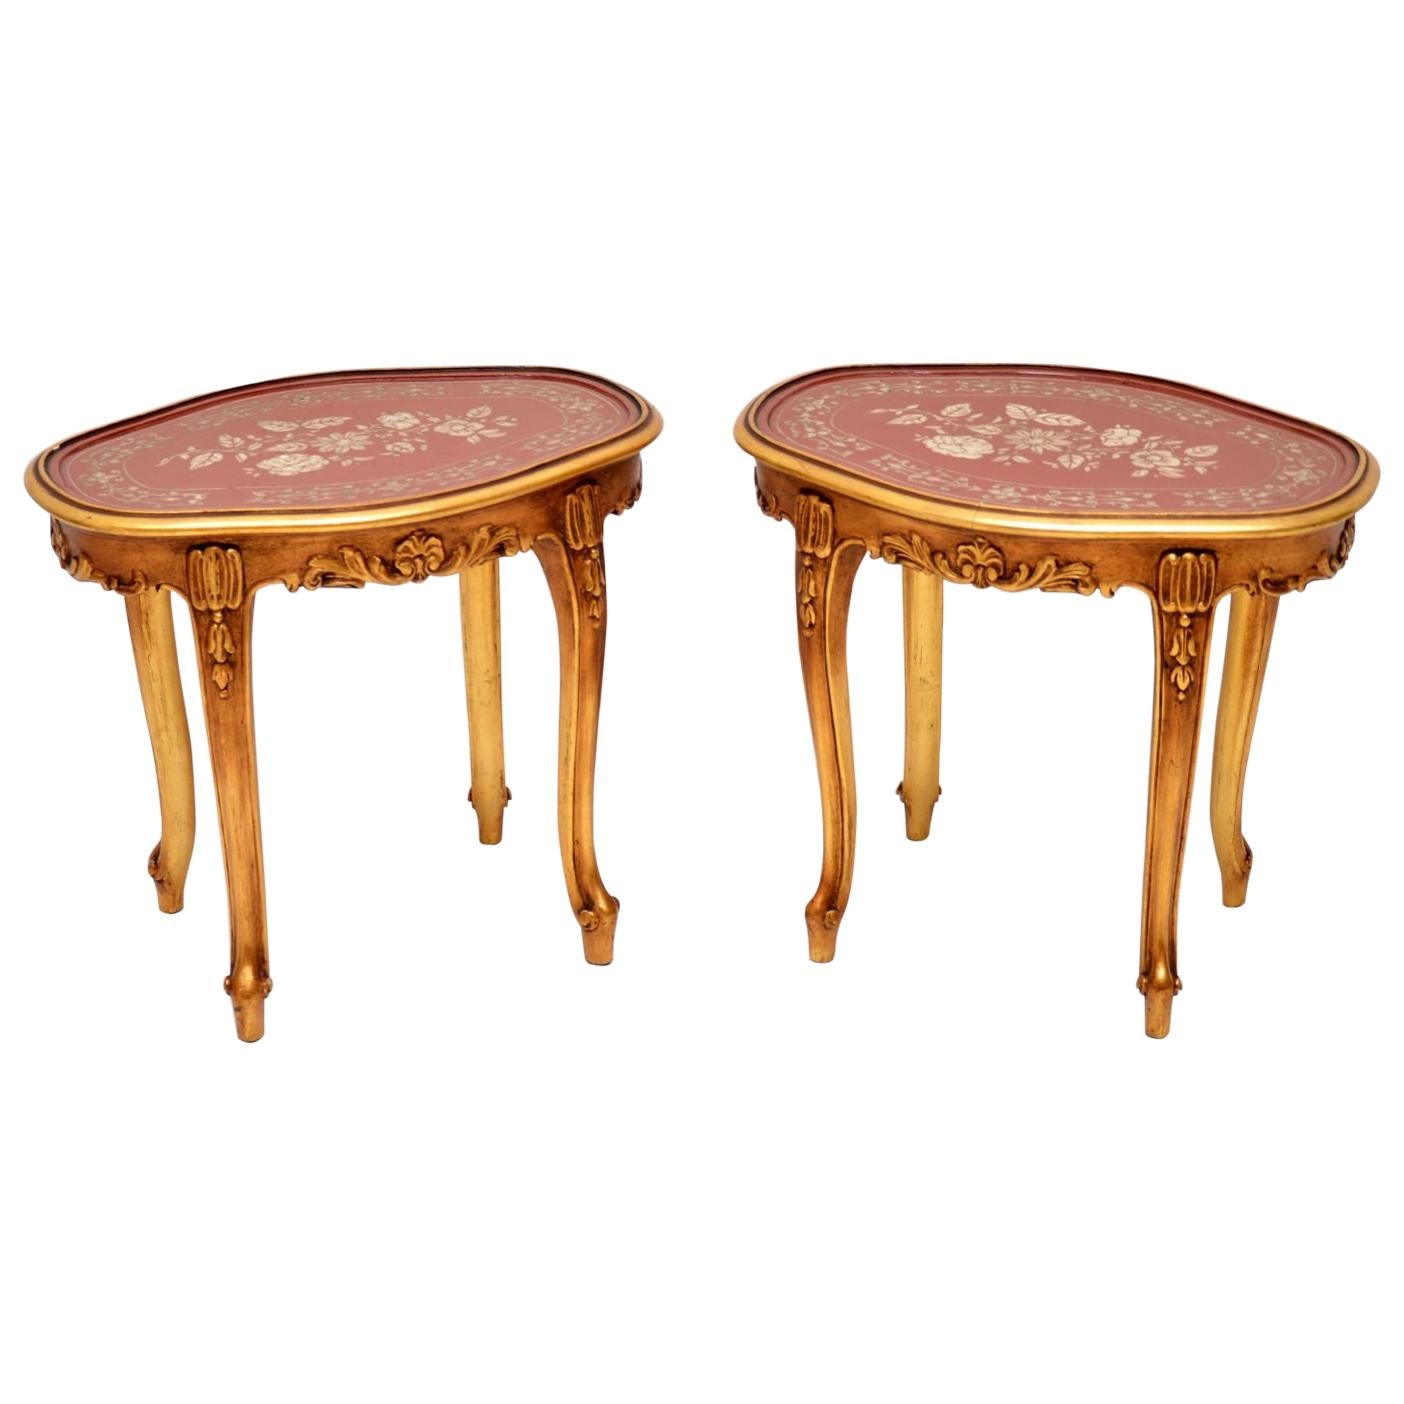 Pair of Antique French Style Gilt Wood Side Tables